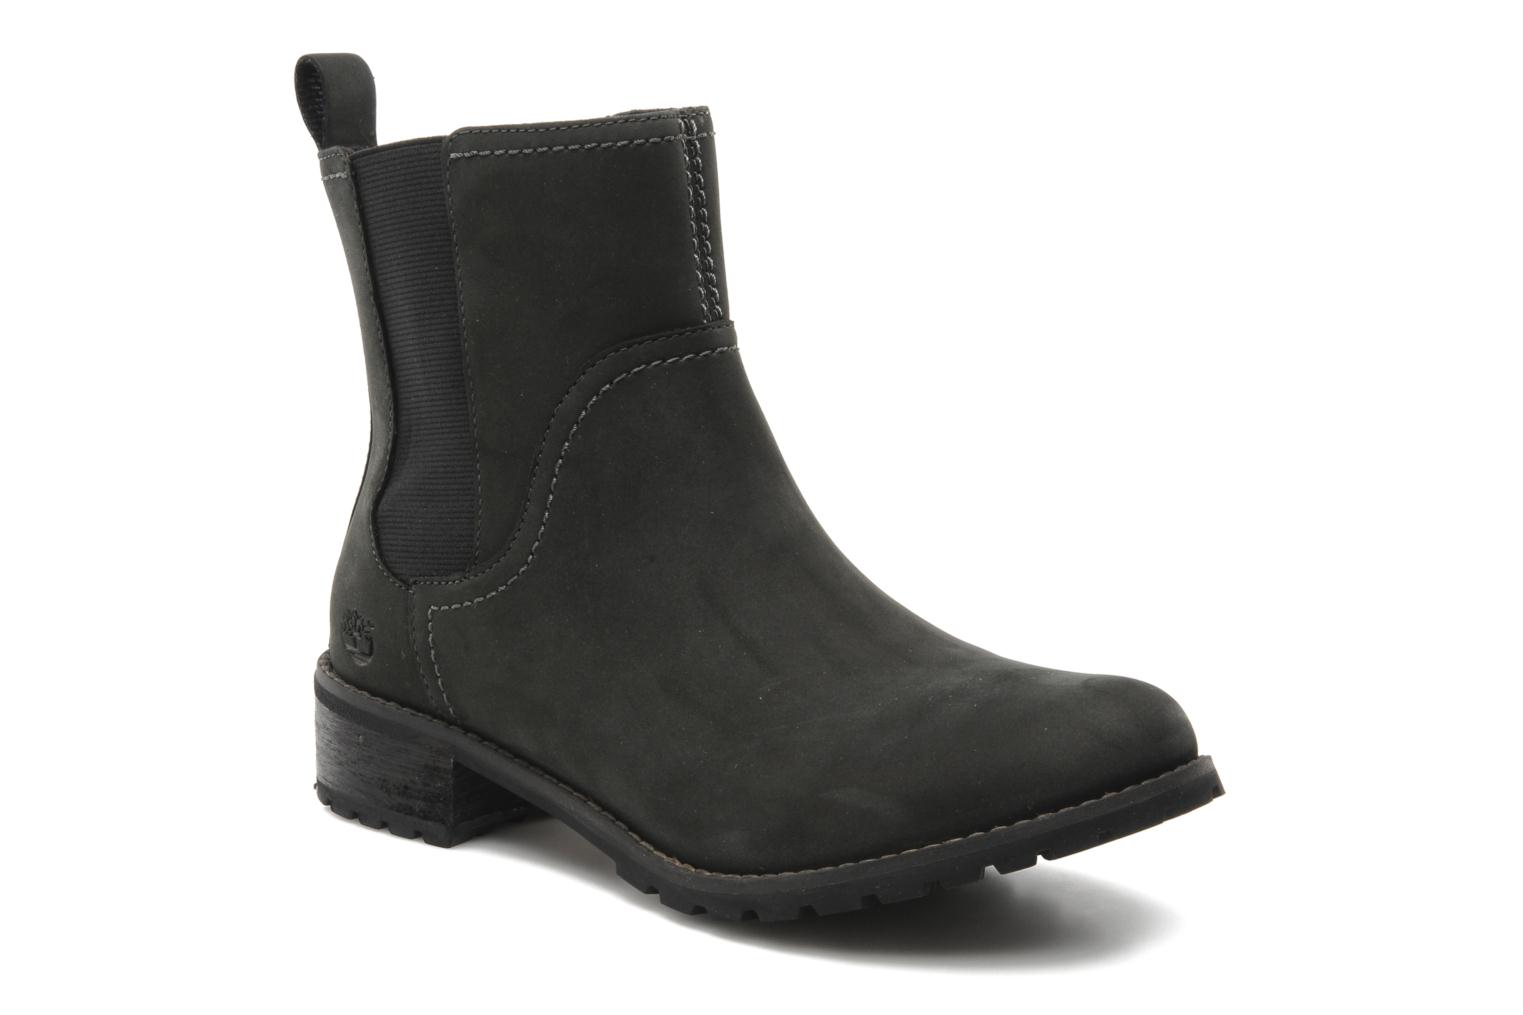 Timberland Earthkeepers Bethel Chelsea Ankle boots in Black at Sarenza ...